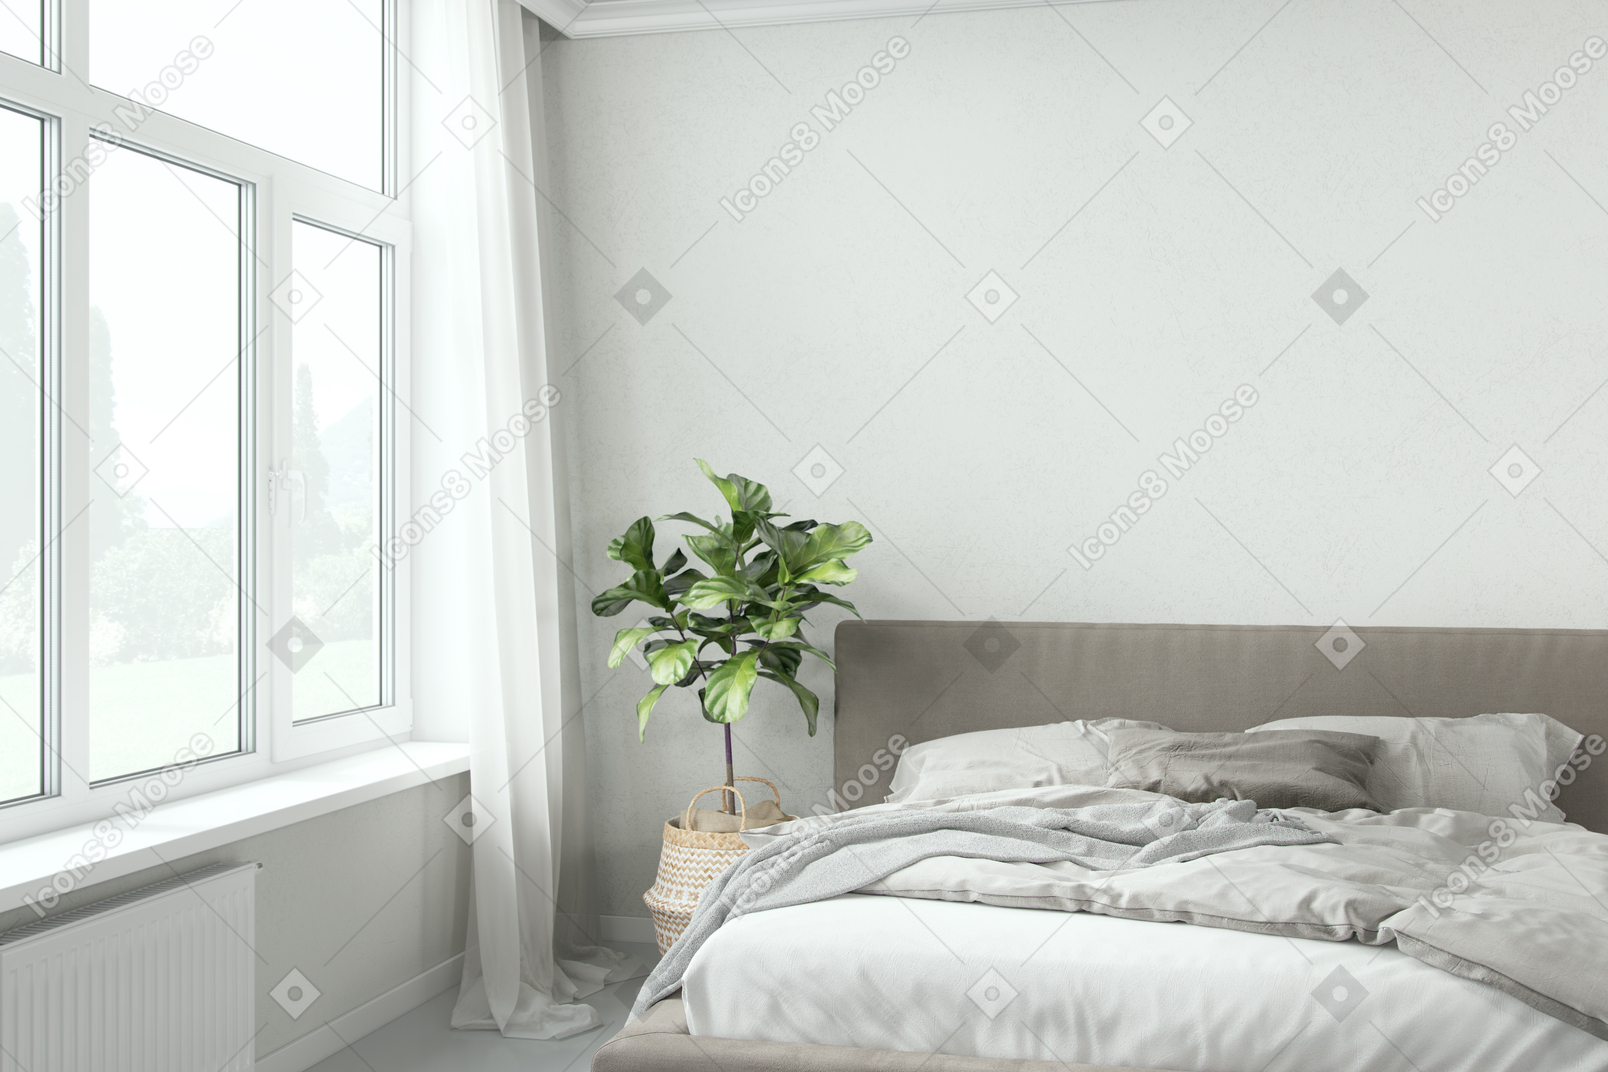 Bedroom interior with bed and plant